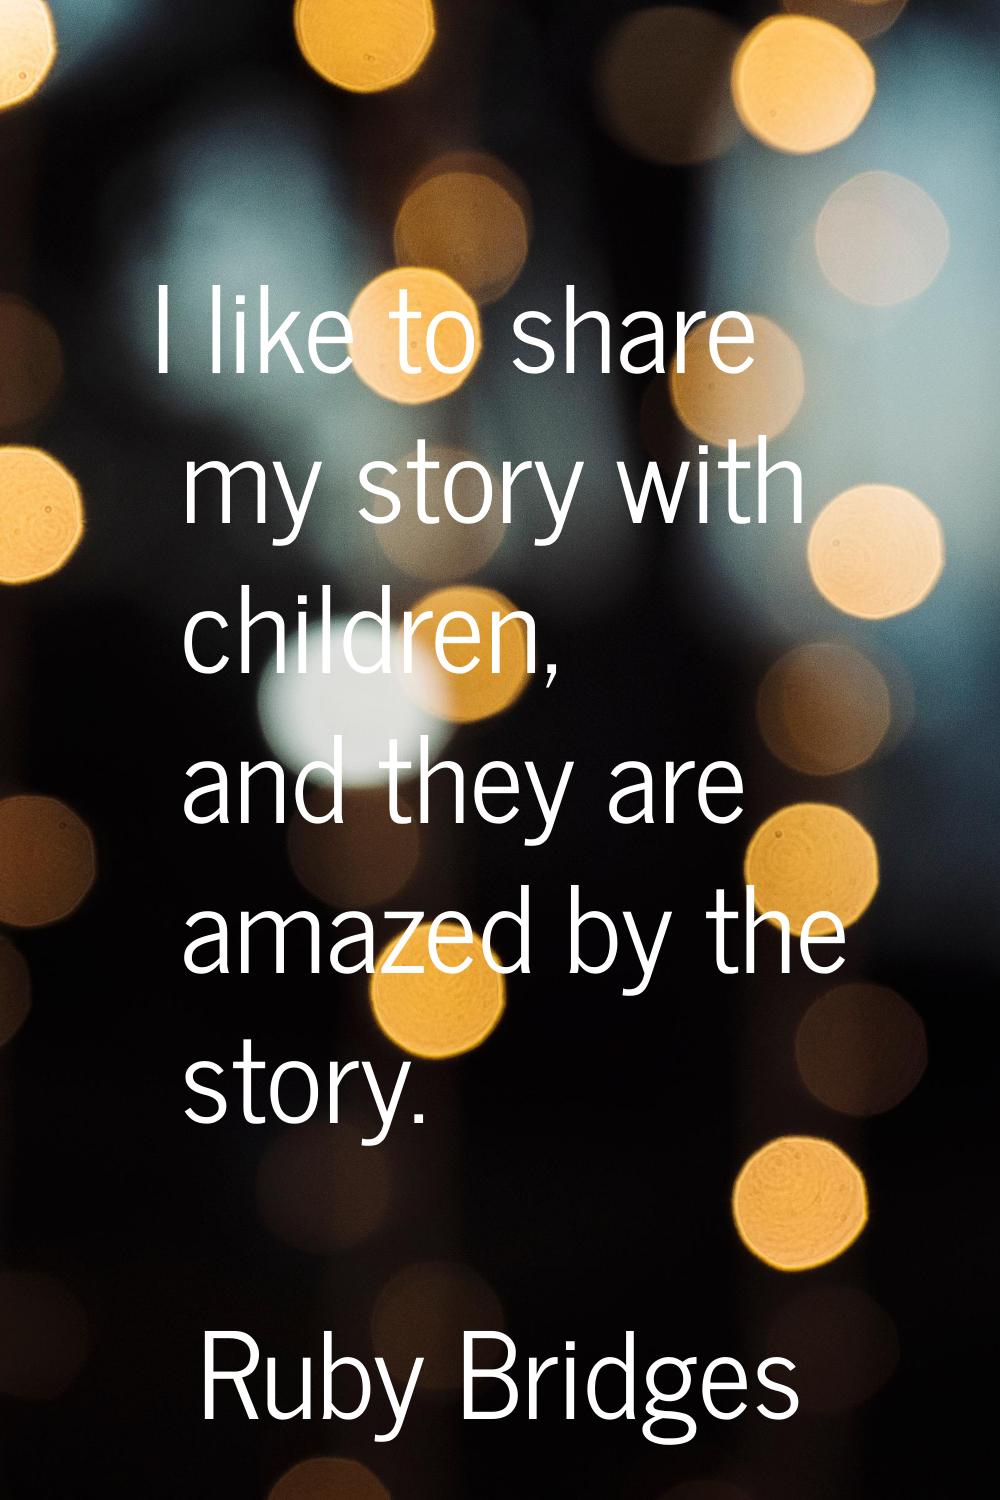 I like to share my story with children, and they are amazed by the story.